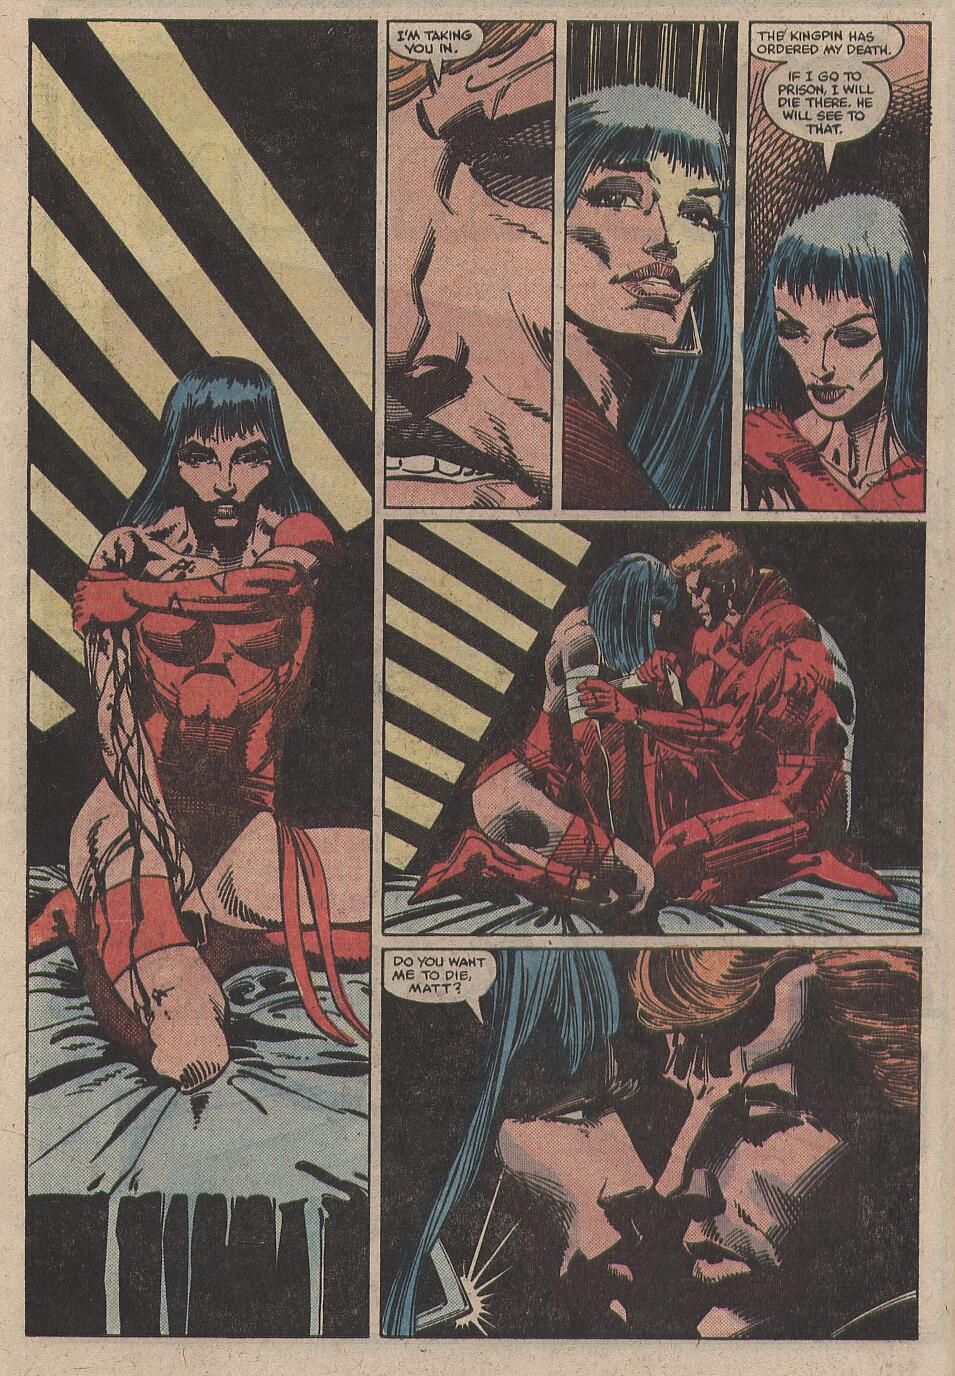 What If? (1977) issue 35 - Elektra had lived - Page 13